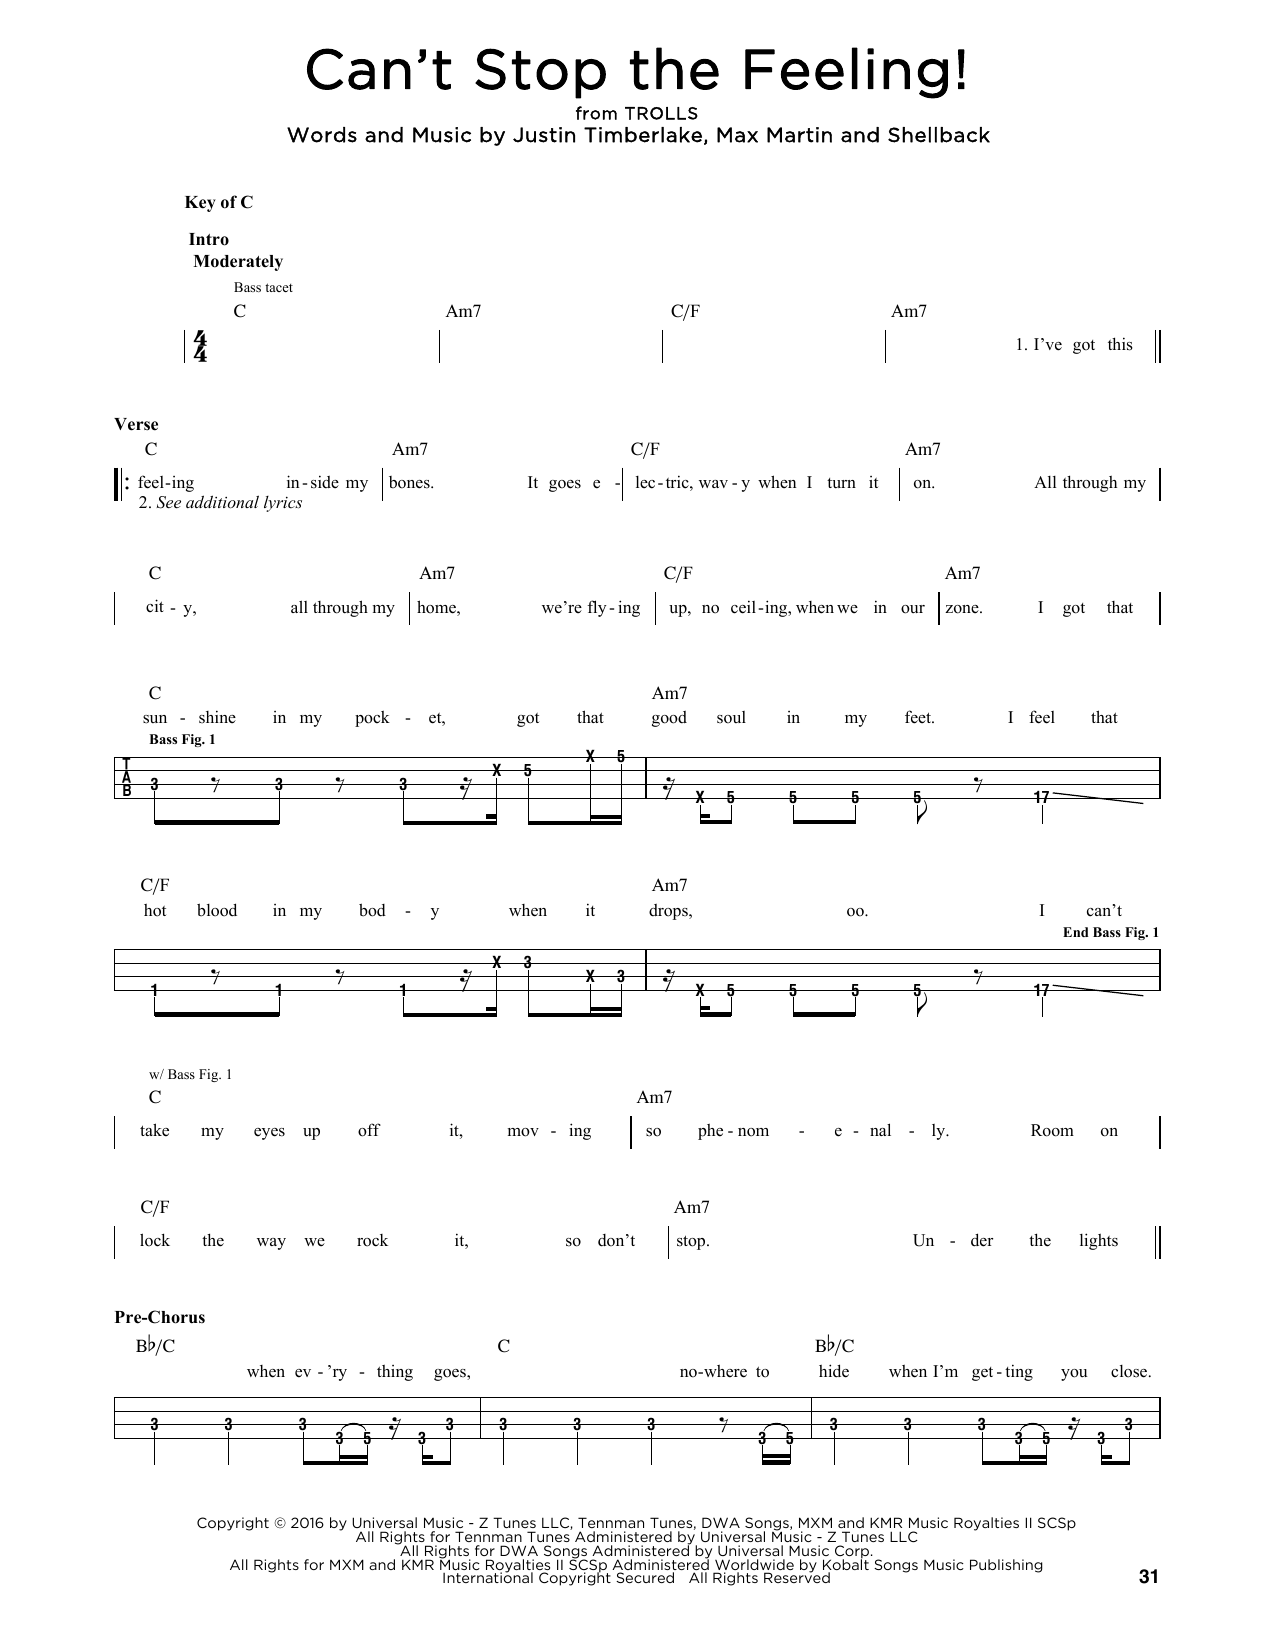 Download Justin Timberlake Can't Stop The Feeling! Sheet Music